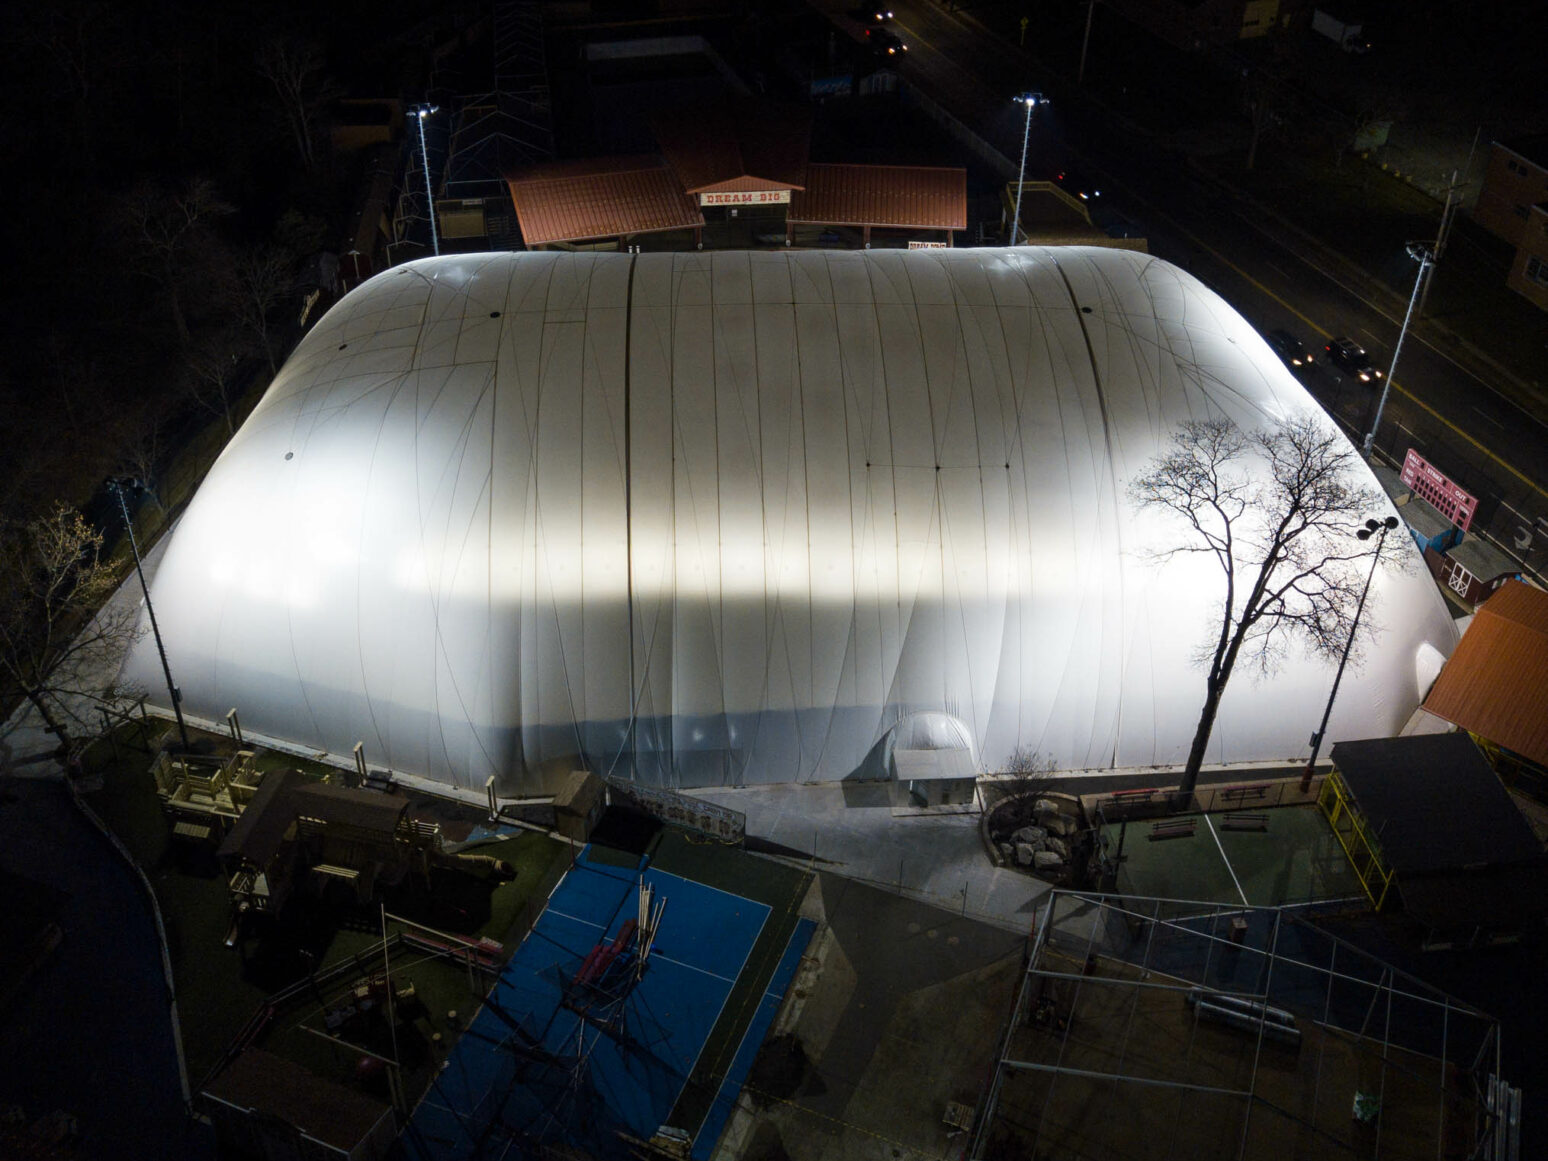 Dome field exterior at night.